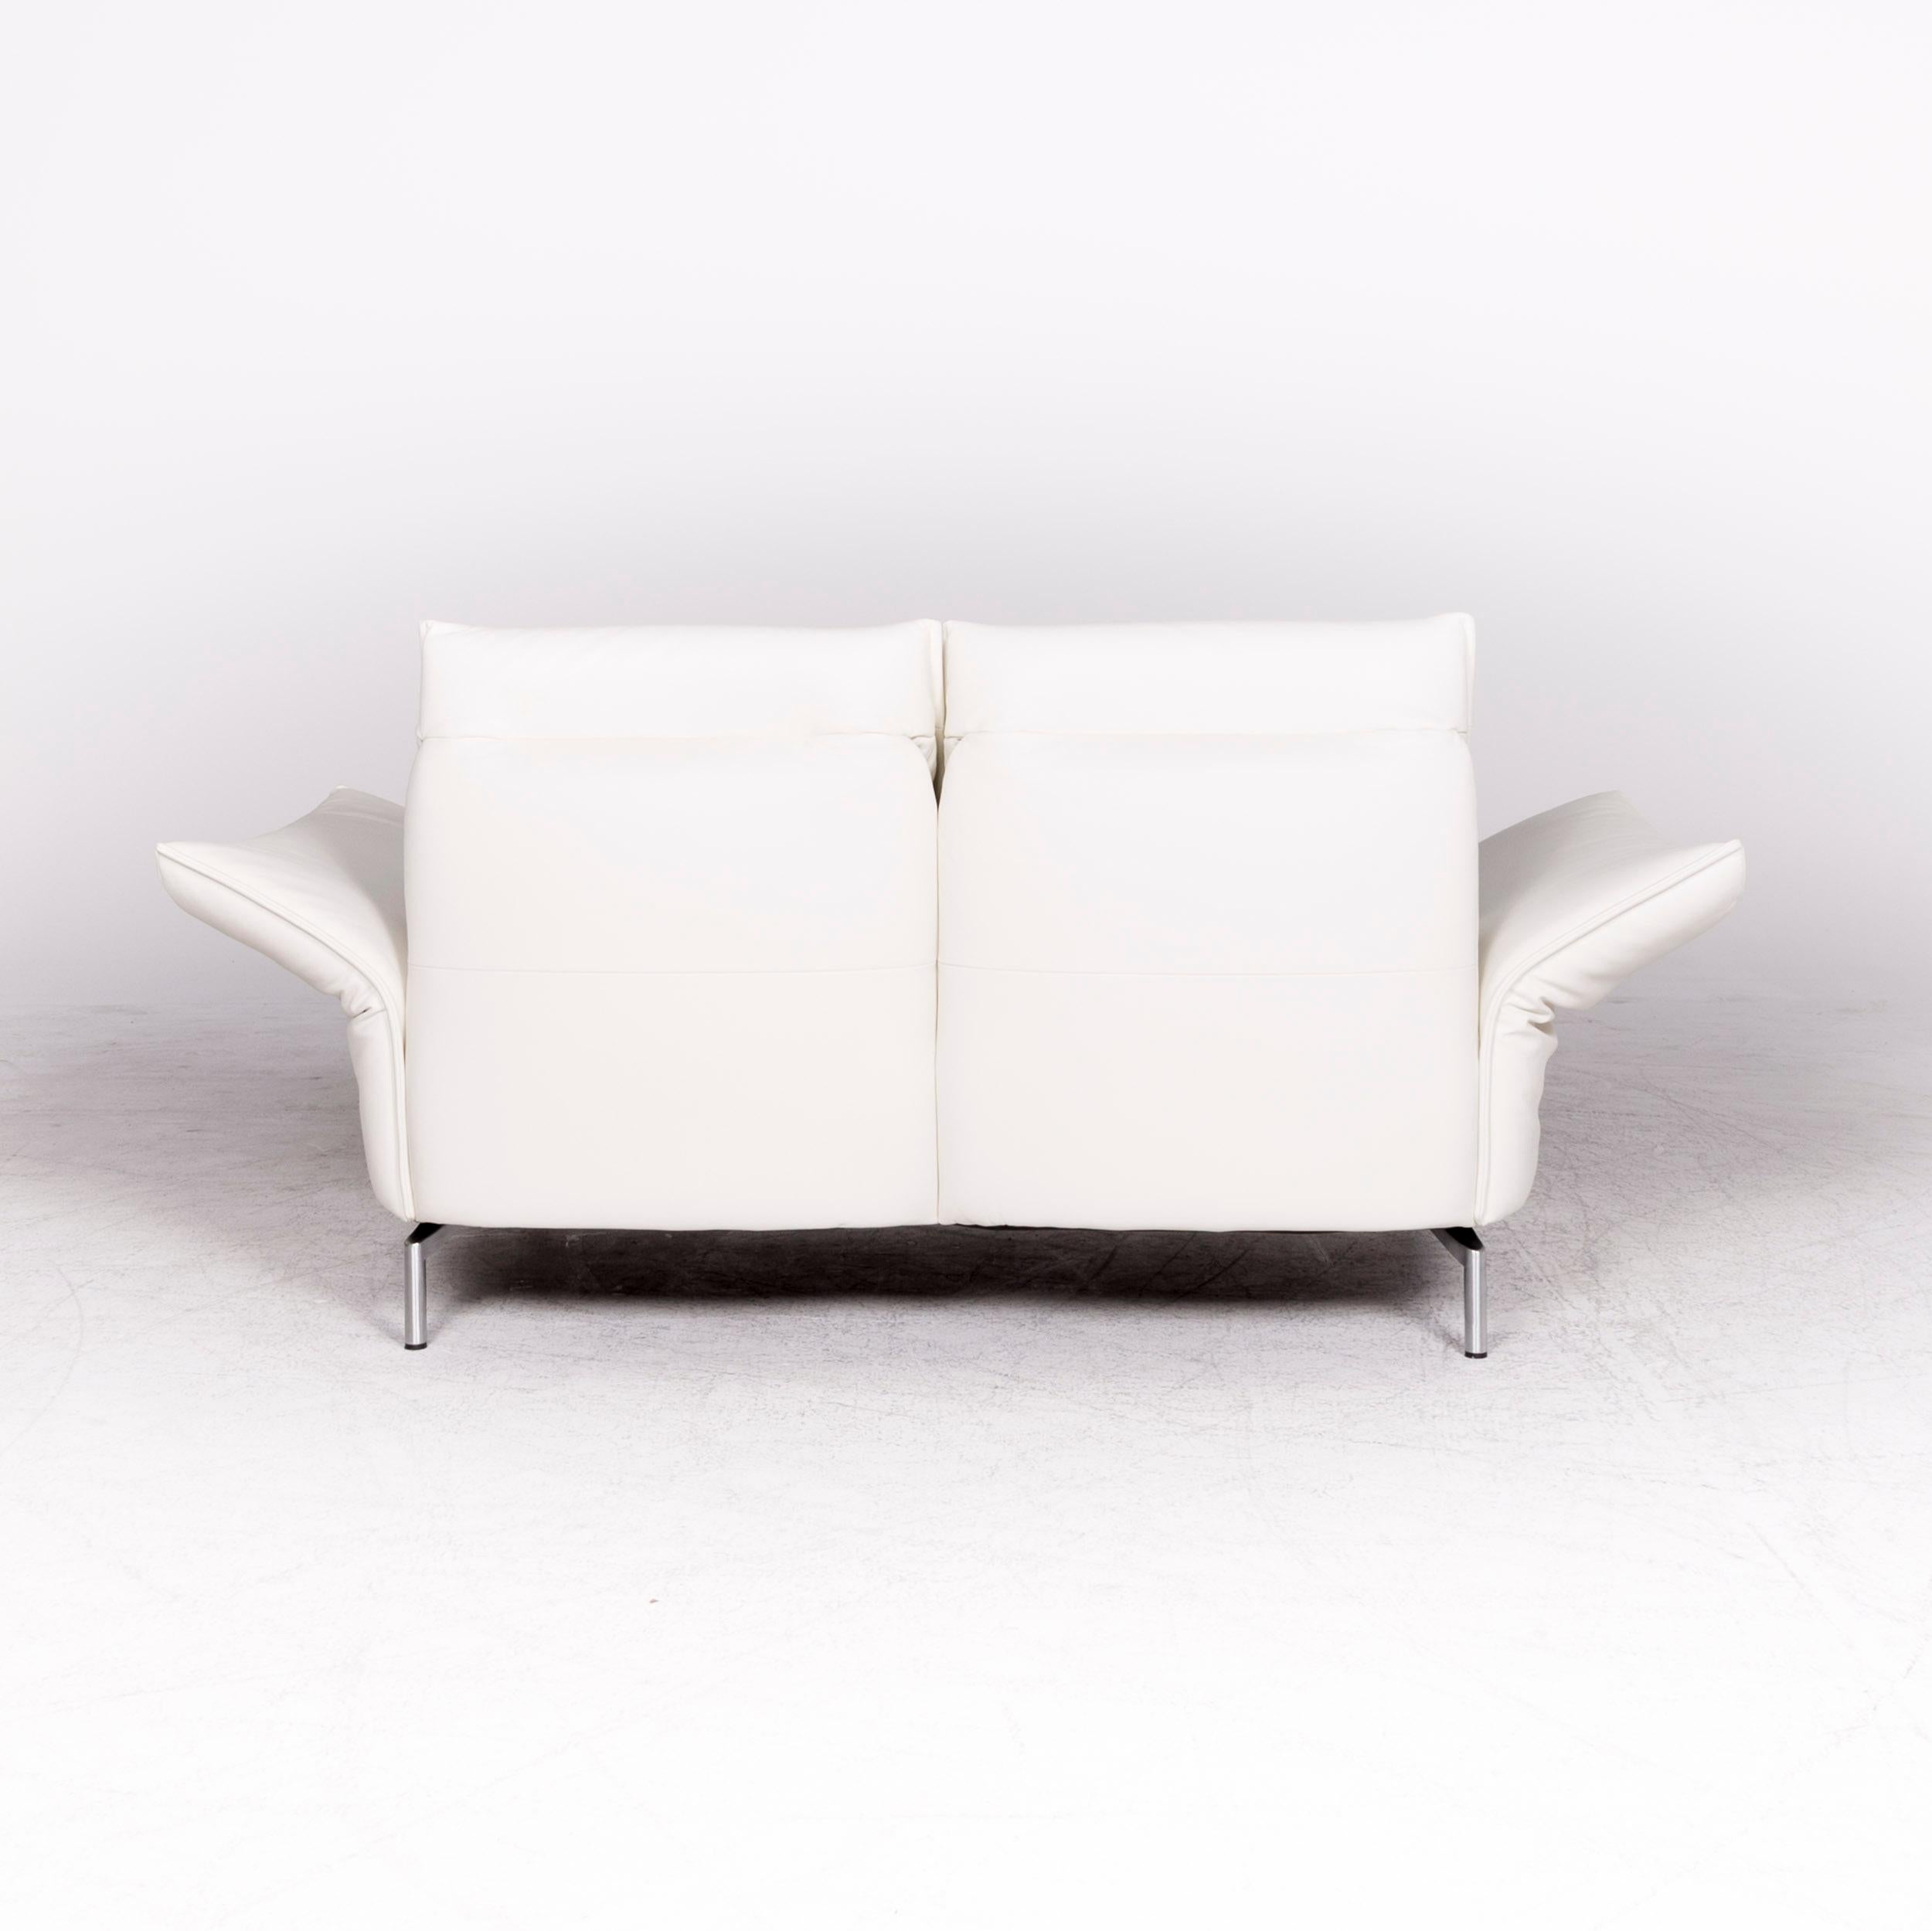 Koinor Vanda Designer Leather Sofa White Real Leather Two-Seat Couch 2